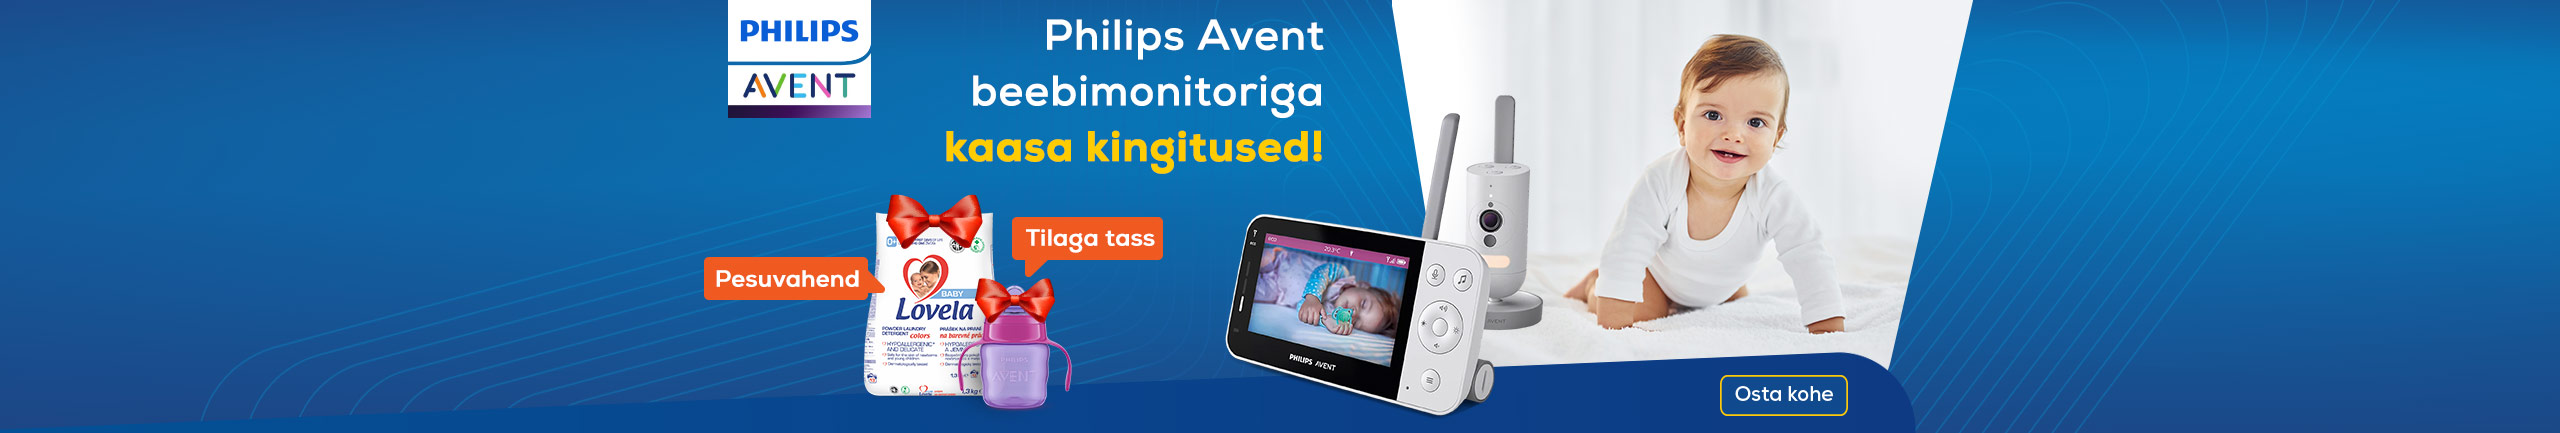 Buy Philips Avent and receive a gift!